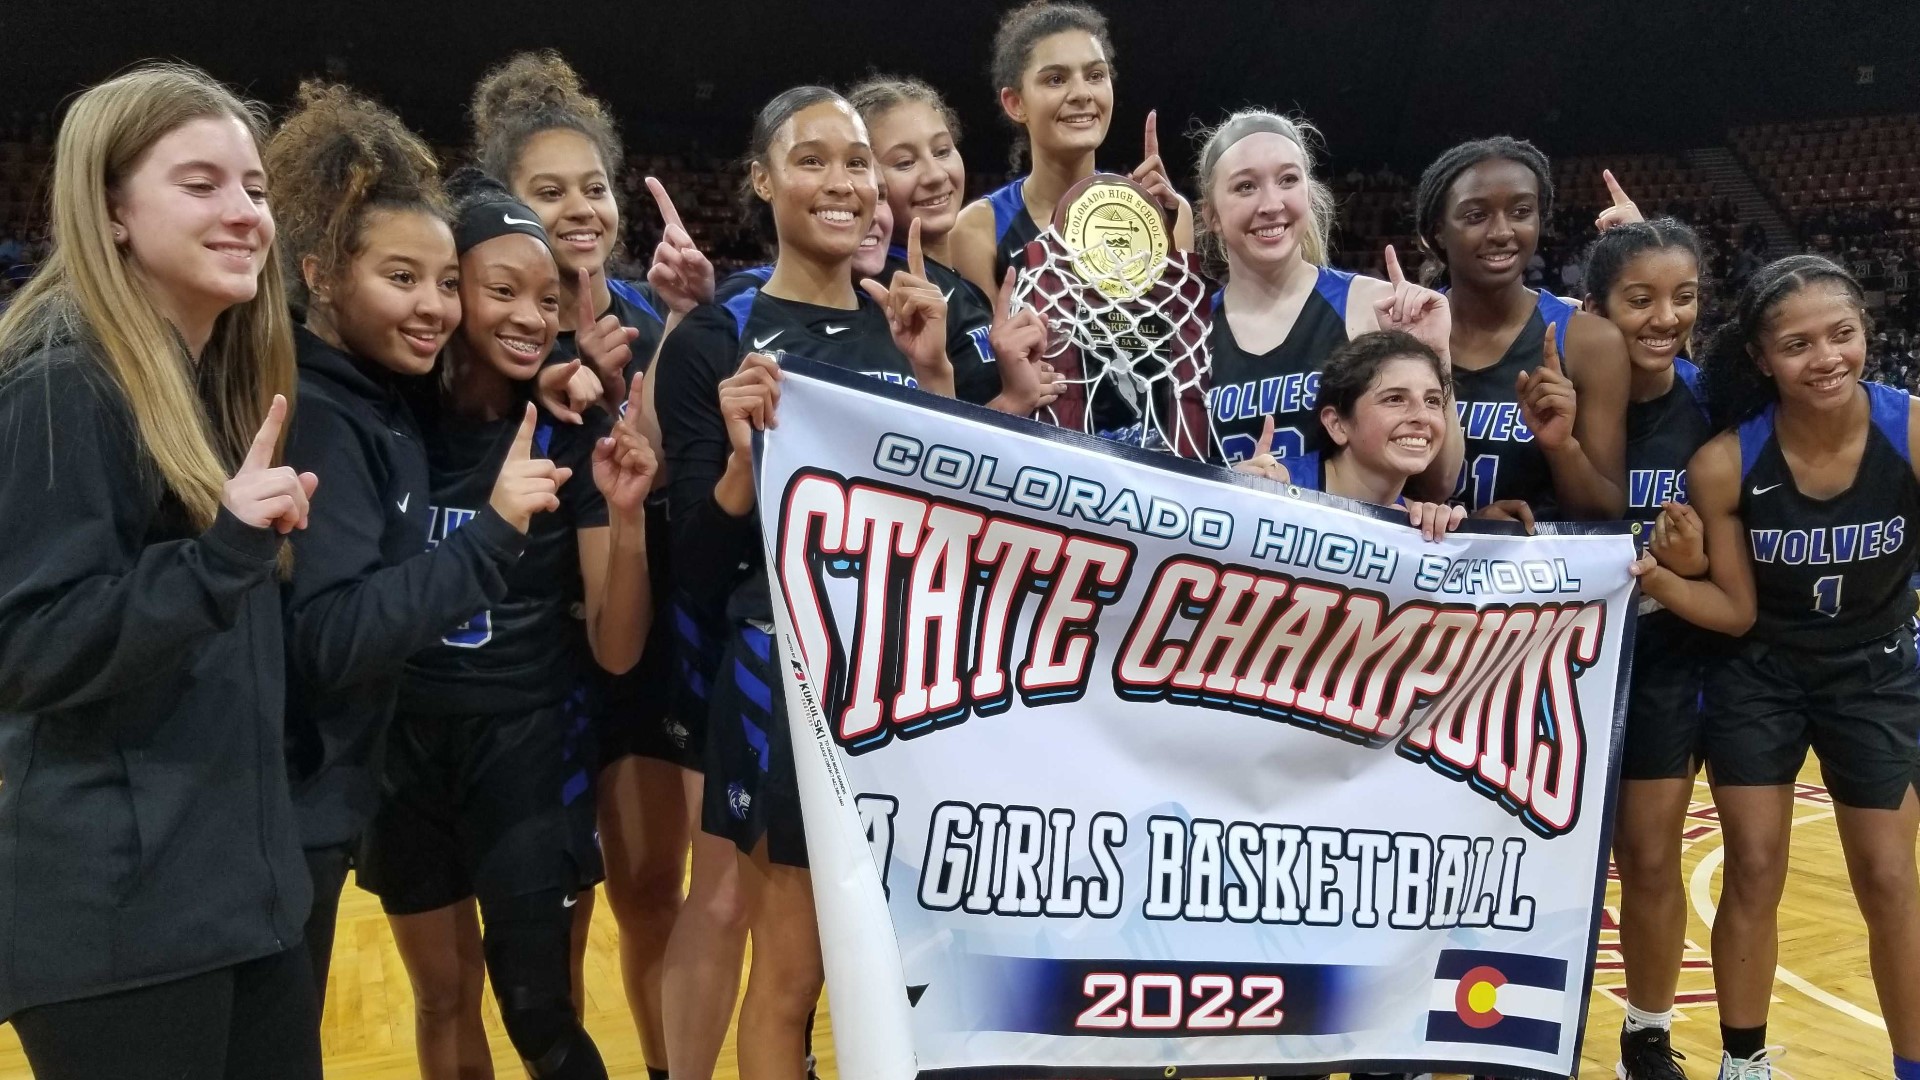 The Wolves defeated the Eagles 52-40 on Saturday night at the Denver Coliseum to capture the Class 5A state title.